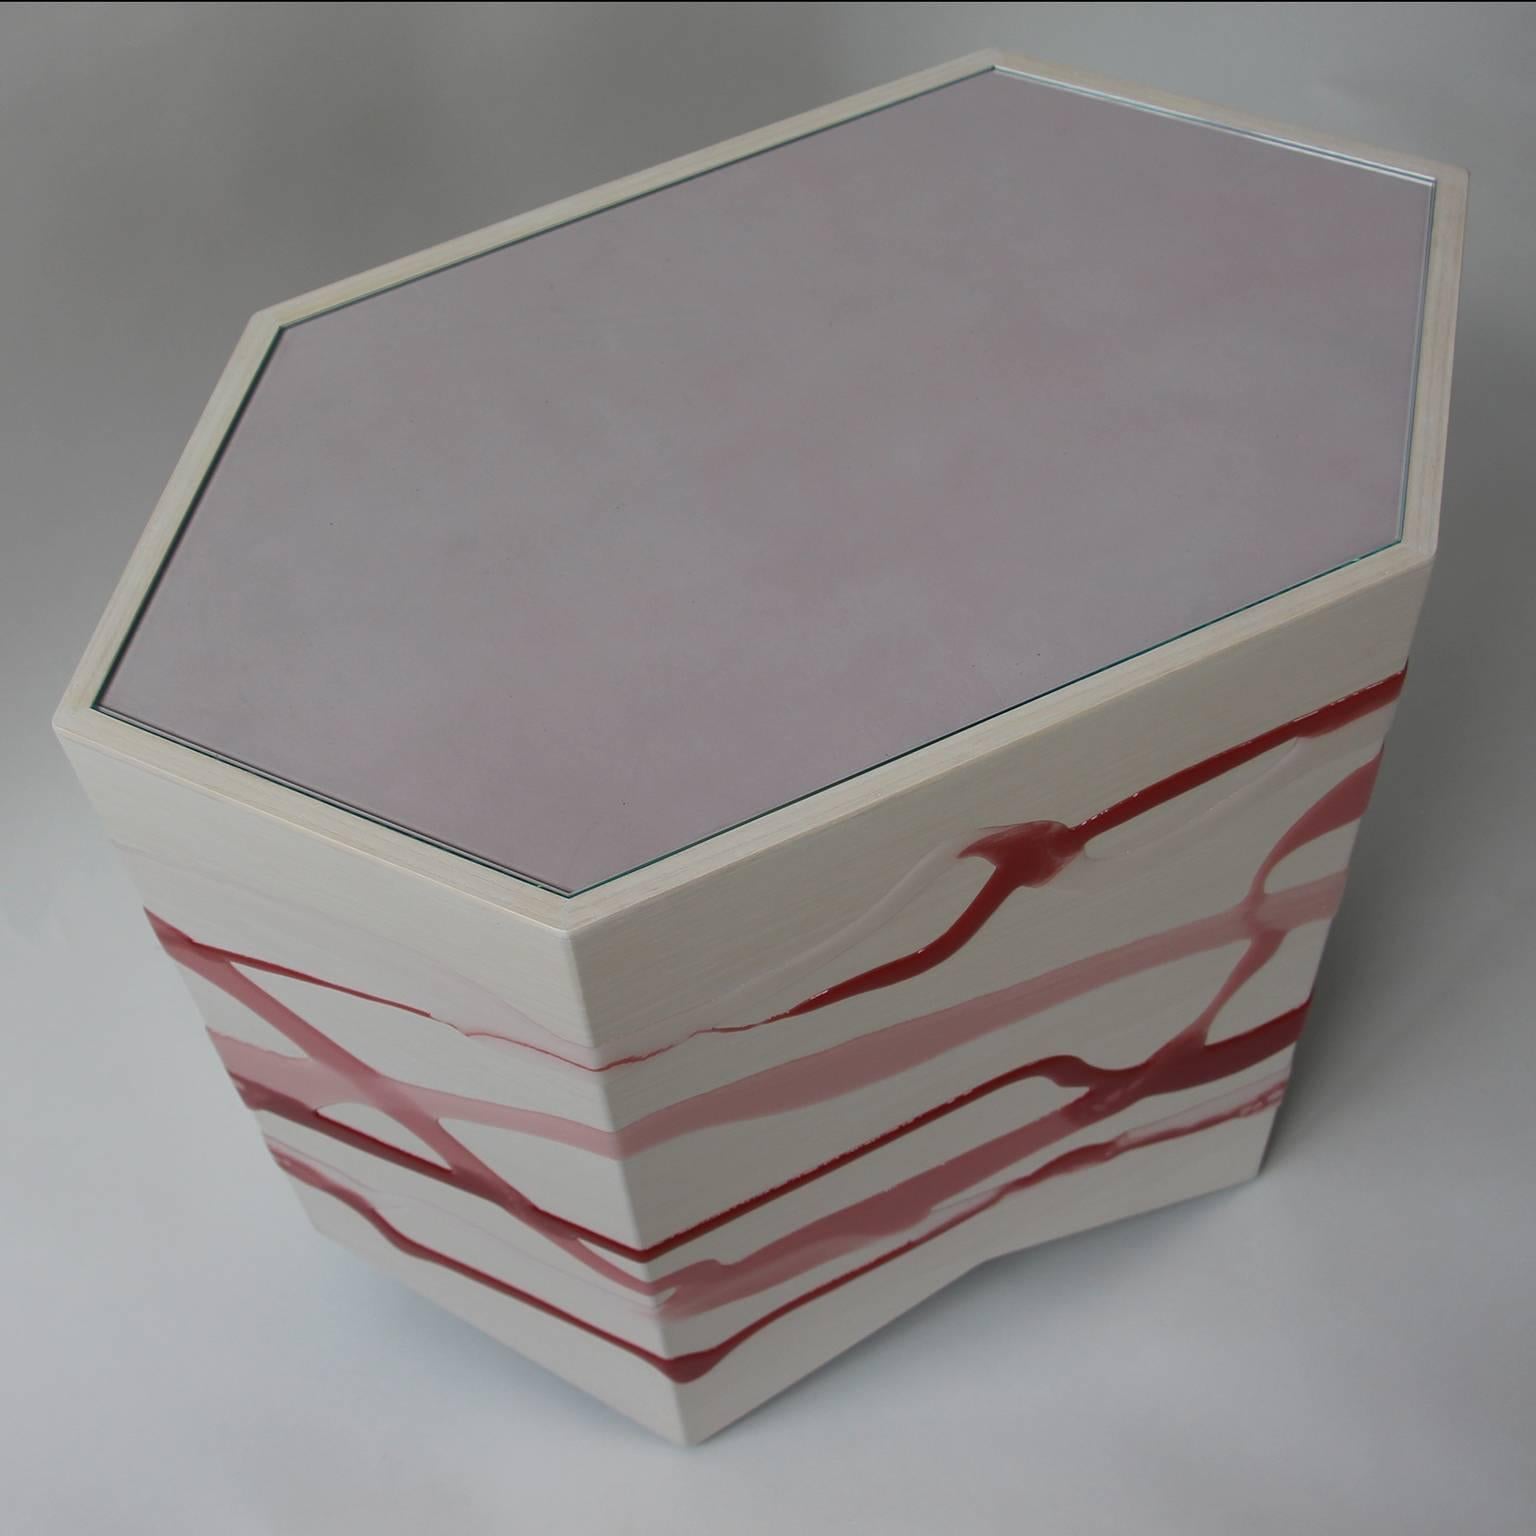 Organic Modern Drip/Fold Side Table - Ash Plywood with Rose-Wine Resin and Leather/Glass Top